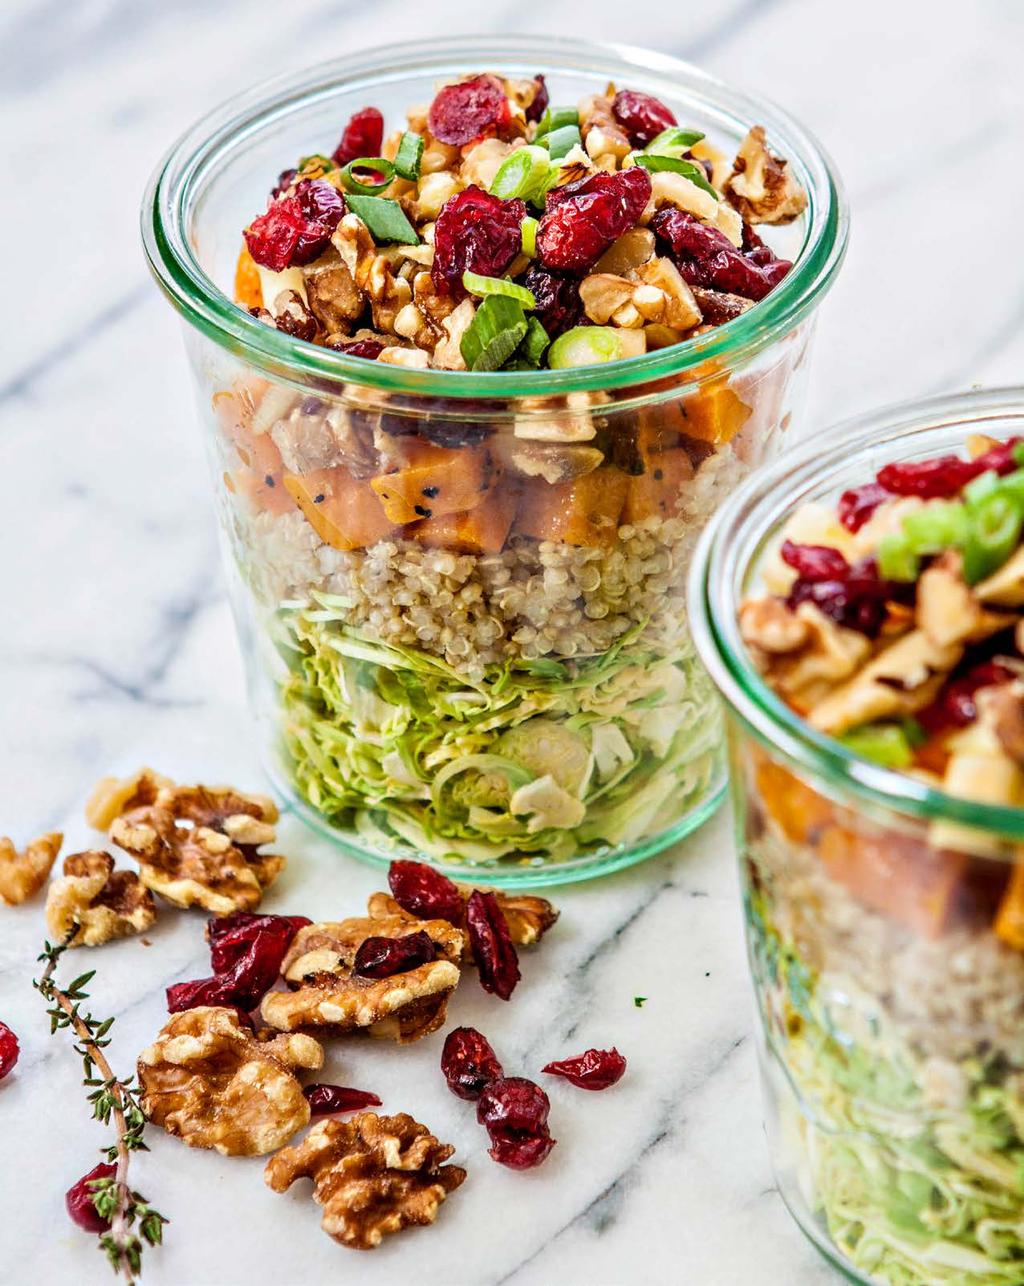 5. Autumn in a Jar Enjoy all of the delicious, comforting flavors of fall in this salad jar. Shredded brussels sprouts pair with roasted butternut squash, cranberries, apples, walnuts and quinoa.